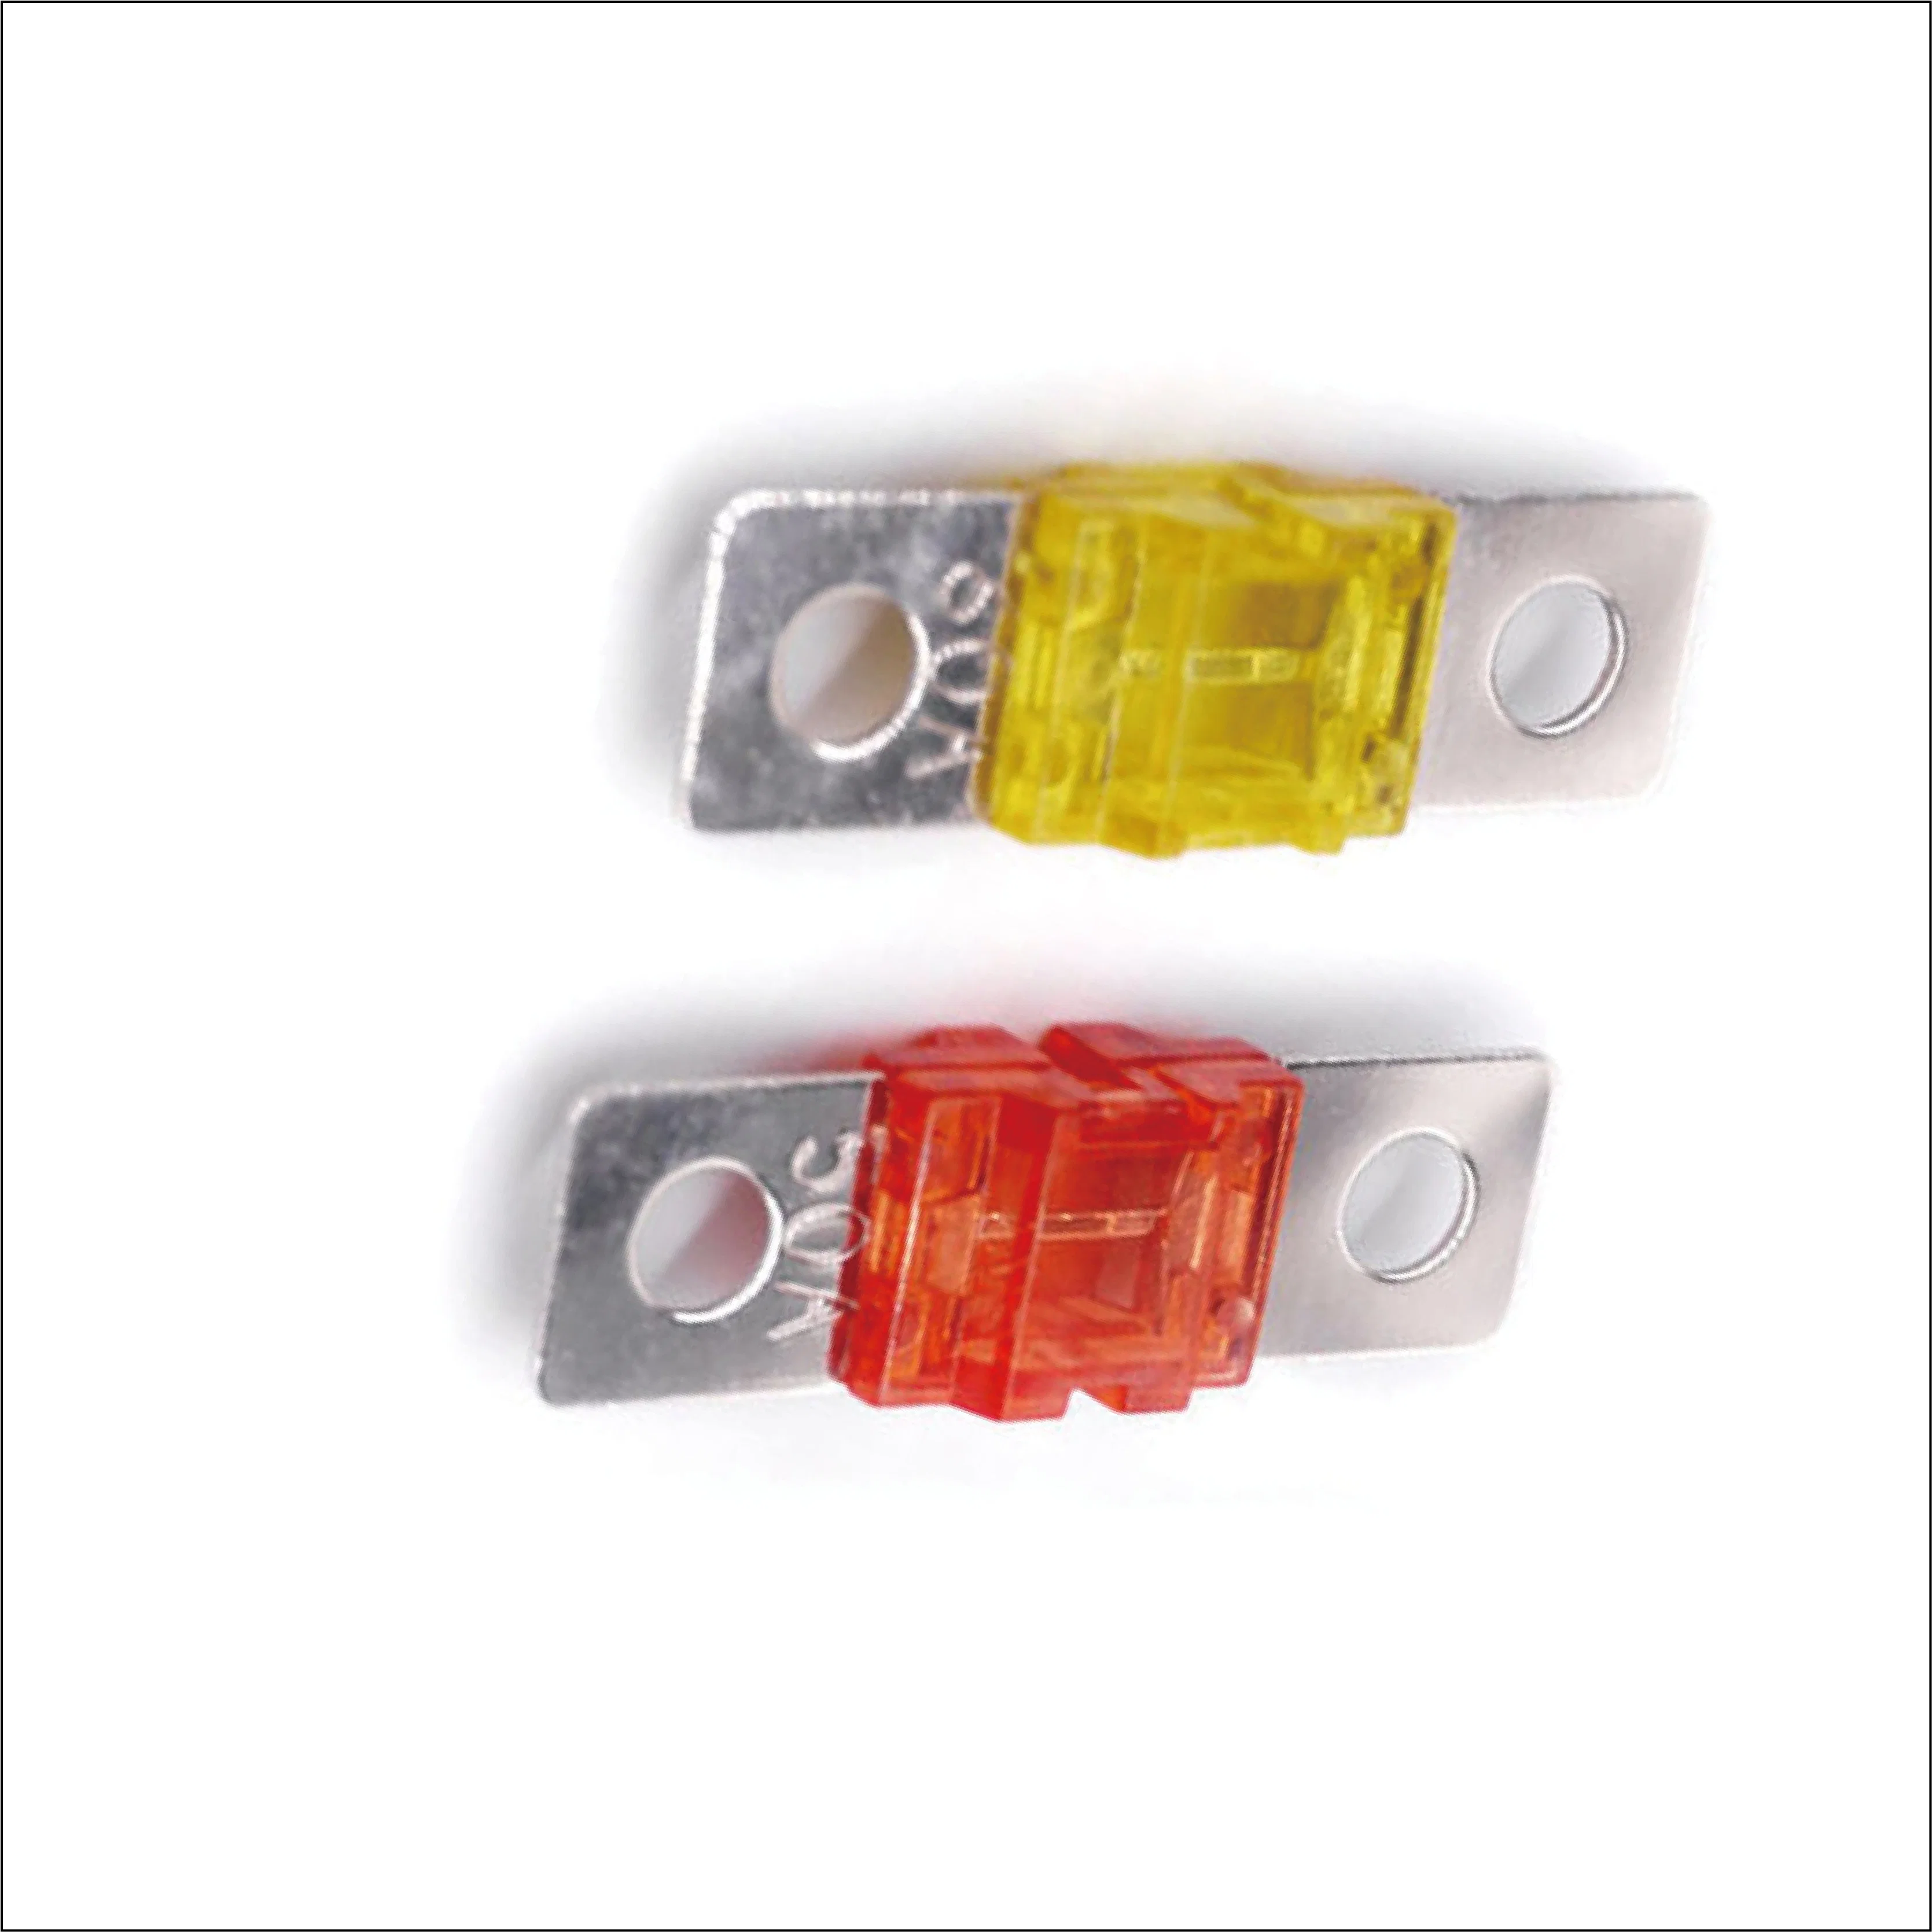 Anl 500A 600A 700A Bolt Down Auto Fuse Time-Delay Current Limiters